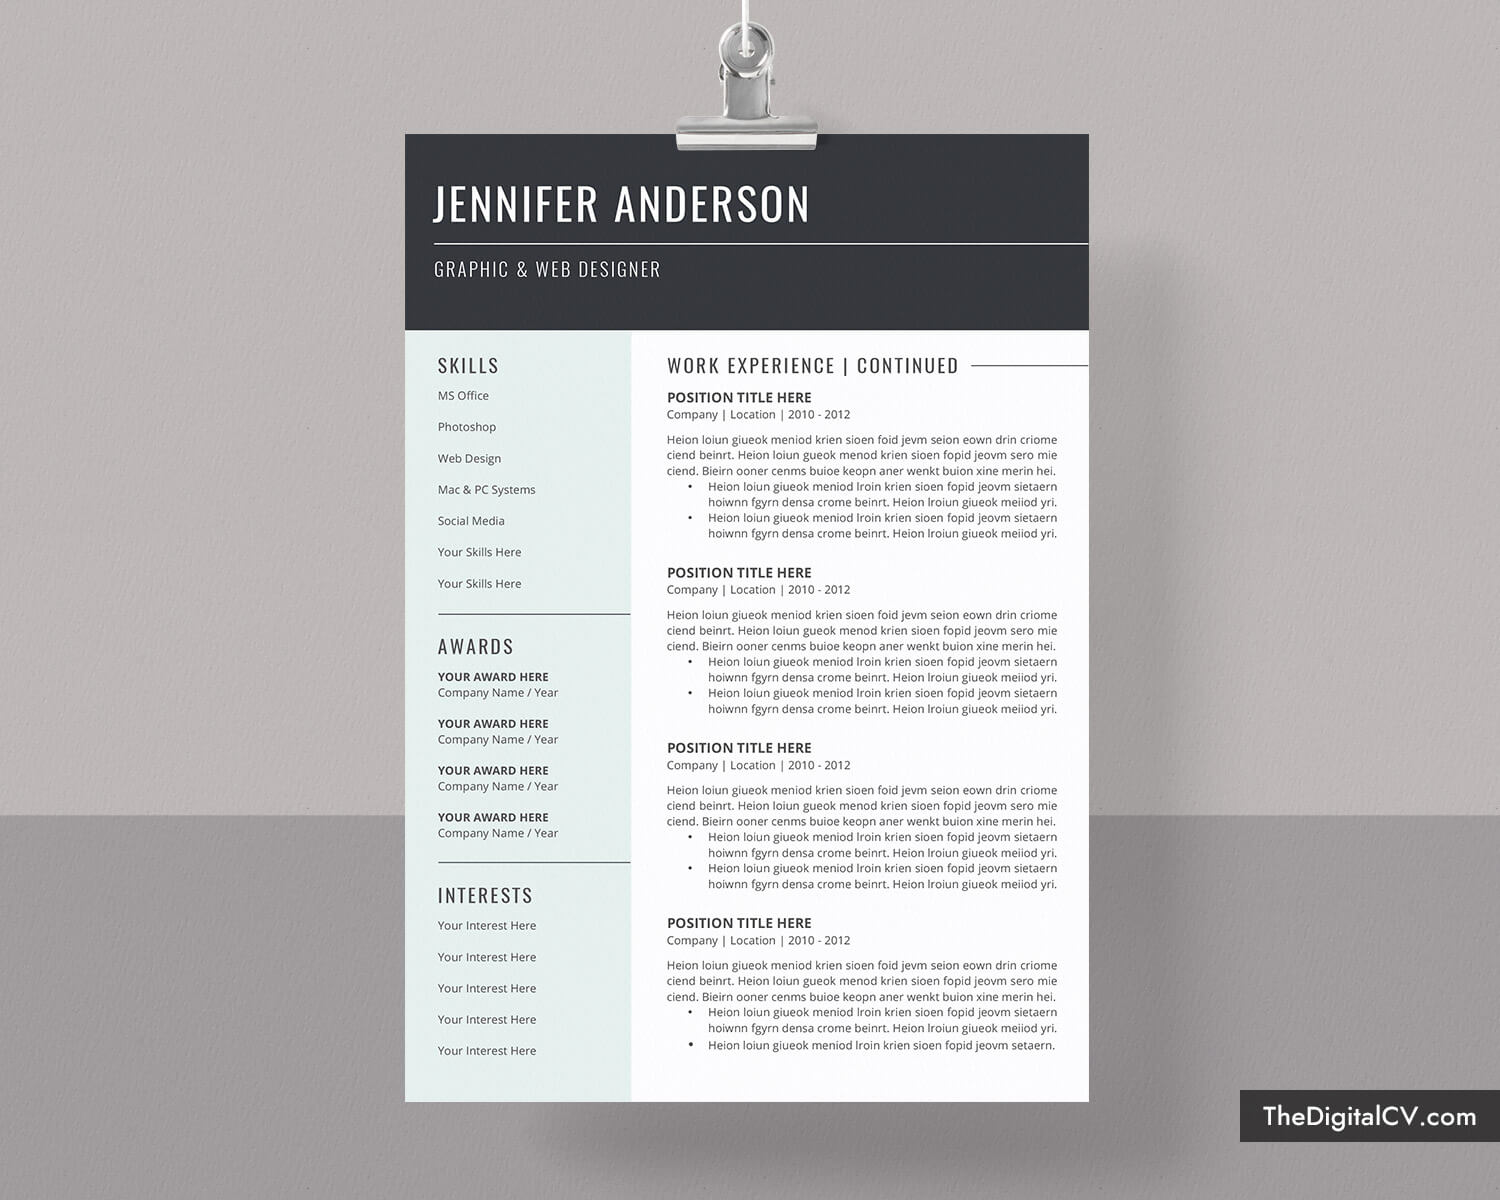 Basic And Simple Resume Template 2020 2021, Cv Template, Cover Letter,  Microsoft Word Resume Template, 1 3 Page, Modern Resume, Creative Resume, Throughout Simple Resume Template Microsoft Word